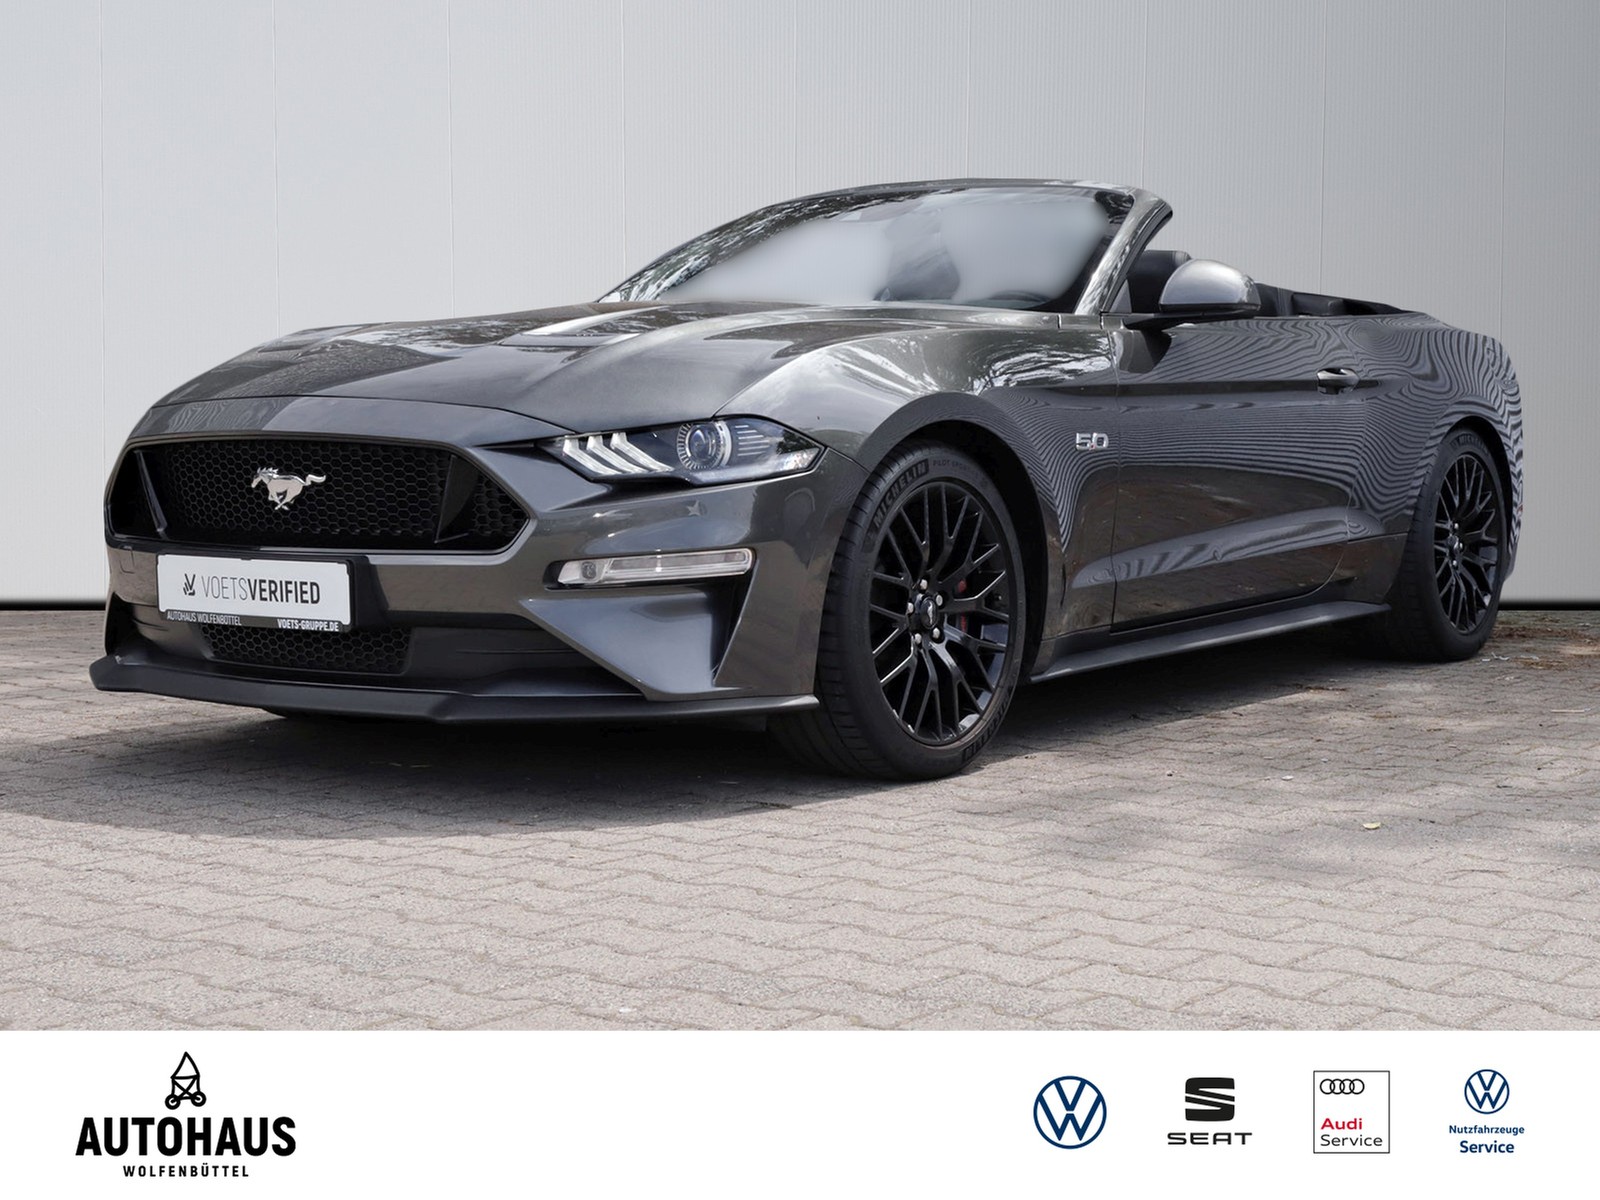 Ford Mustang GT Convertible PERFORMANCE PAKET